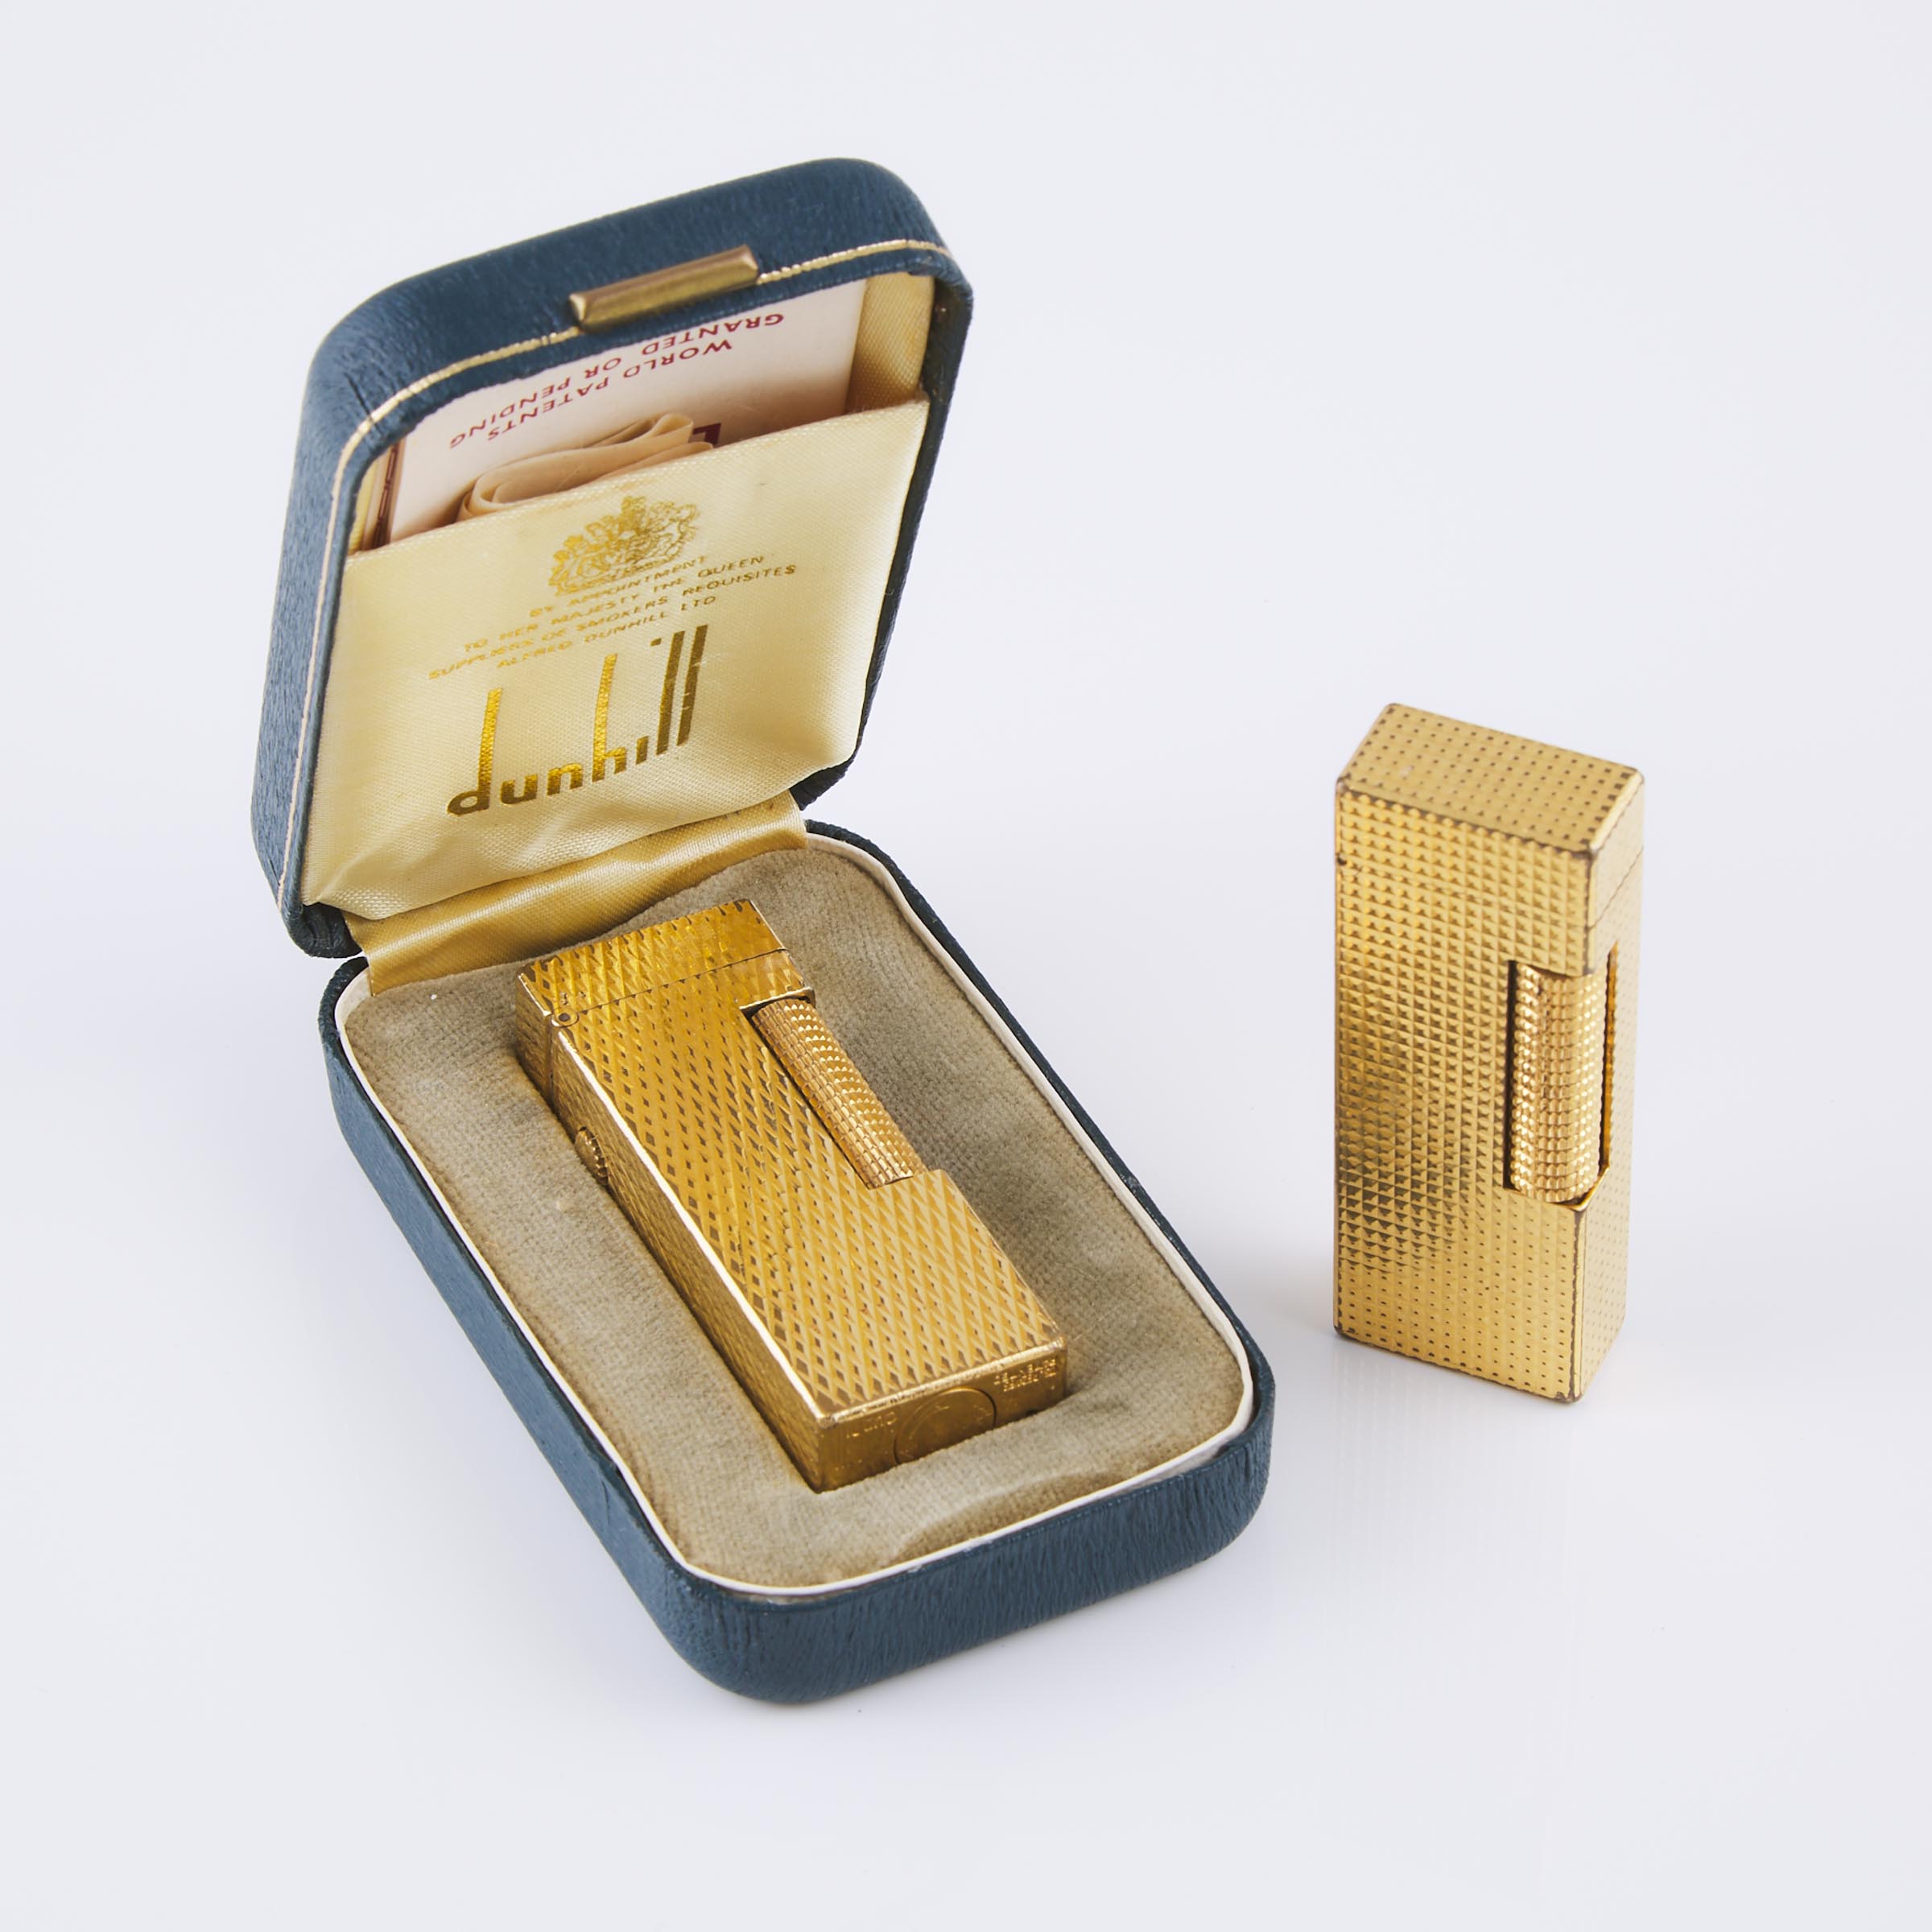 2 Dunhill 'Rollagas' Lighters